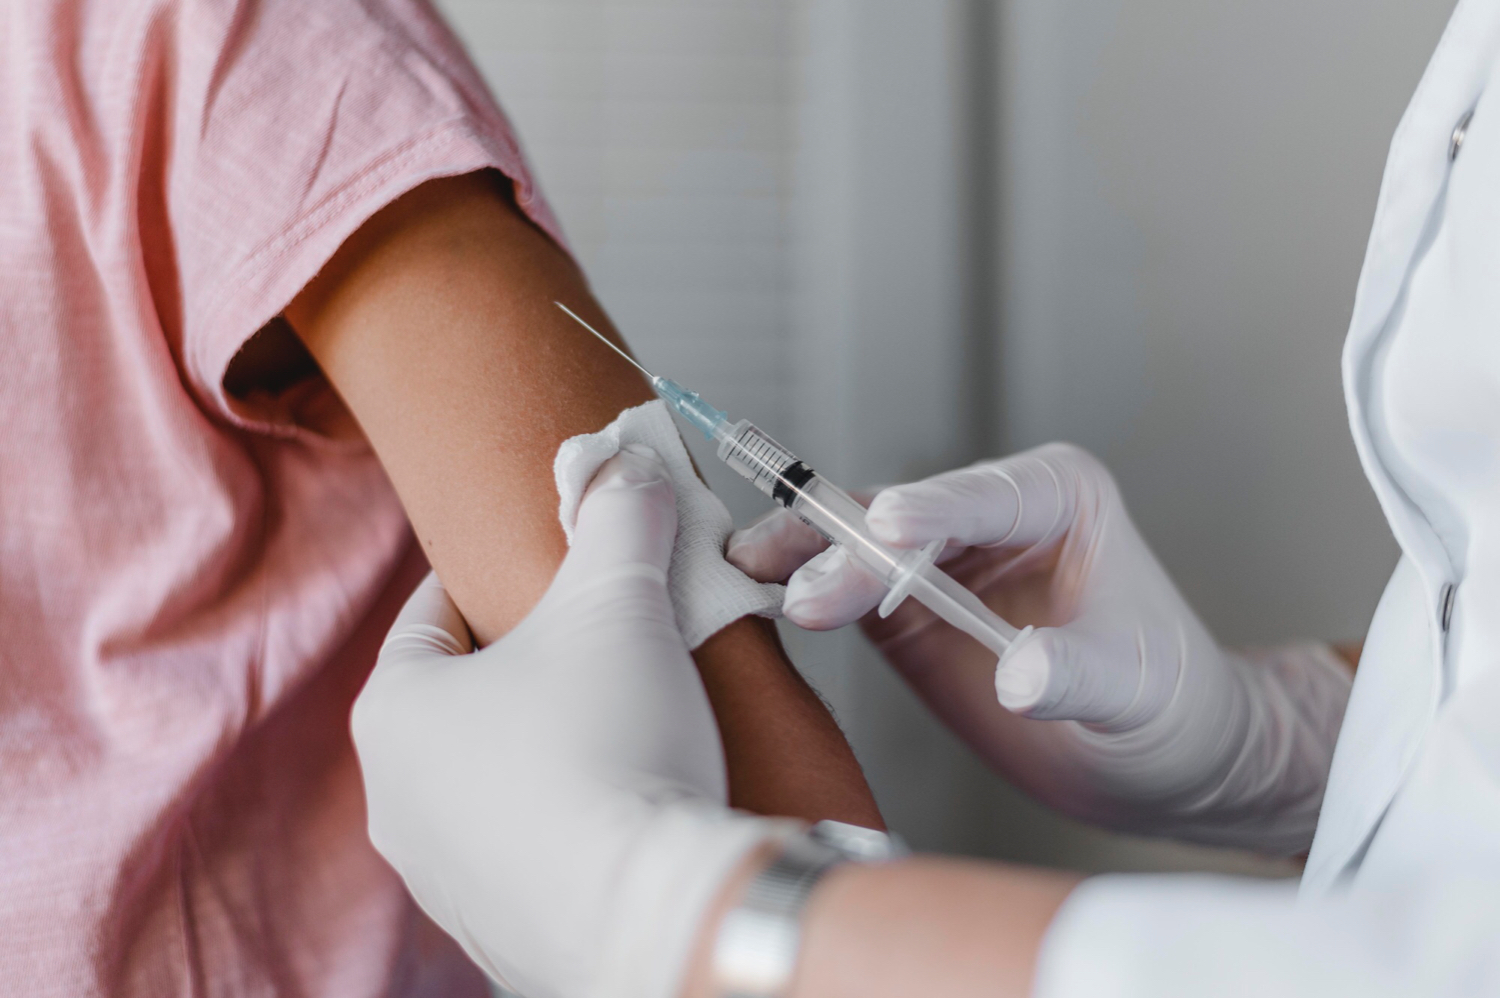 Two groups got three doses of the experimental vaccine along with either a low or a high dose of an adjuvant – an ingredient designed to super-charge the body’s response to a vaccine – while the third group was given a control vaccine.
Results, which researchers said would soon be published in The Lancet medical journal, showed efficacy of 77% in the high-dose adjuvant group and 74% among those who got the vaccine with a low dose of adjuvant (a substance which enhances the body’s immune response to an antigen).